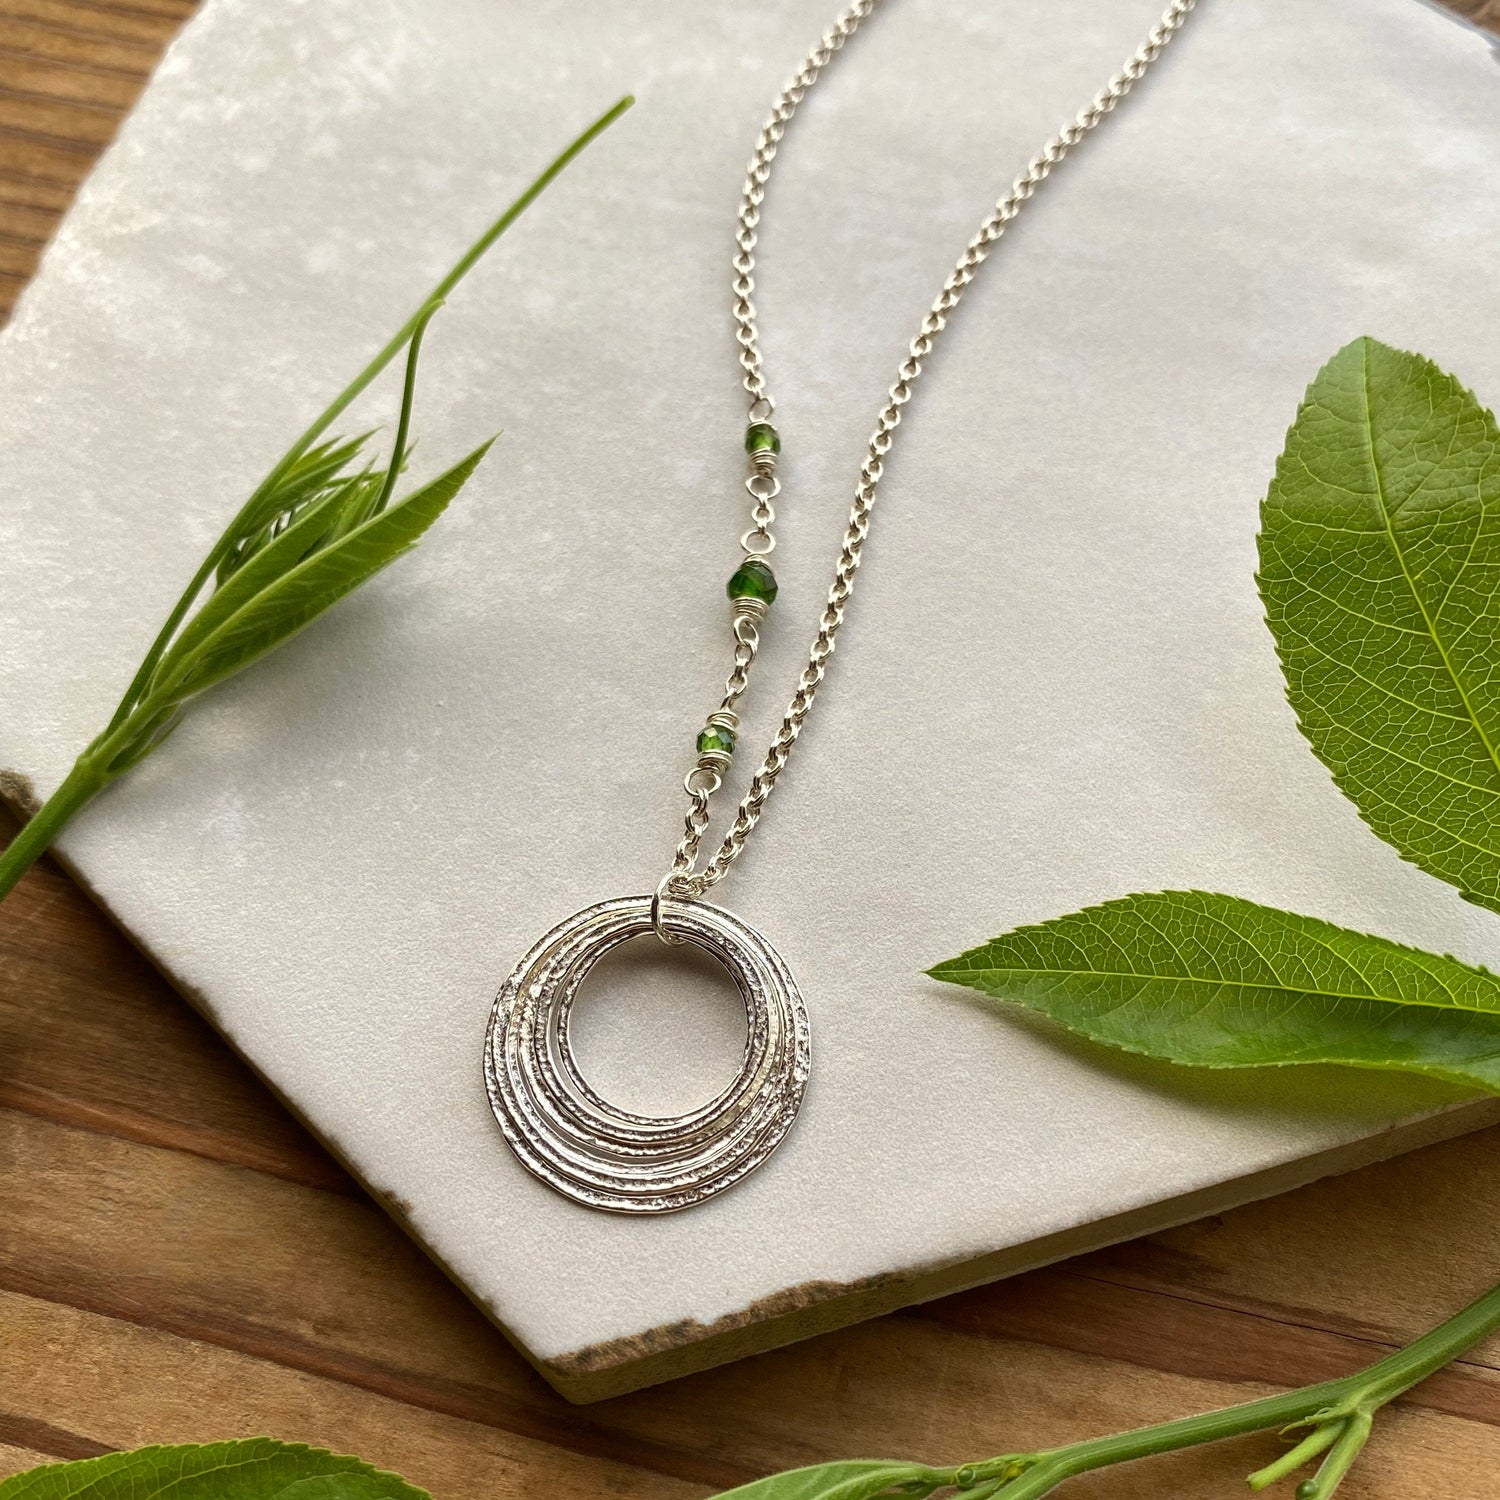 70th Birthday Minimalist Birthstone Necklace, Handcrafted Sterling Silver Seven Circle Pendant, 7 Rings for 7 Decades, 70th Birthday Gift